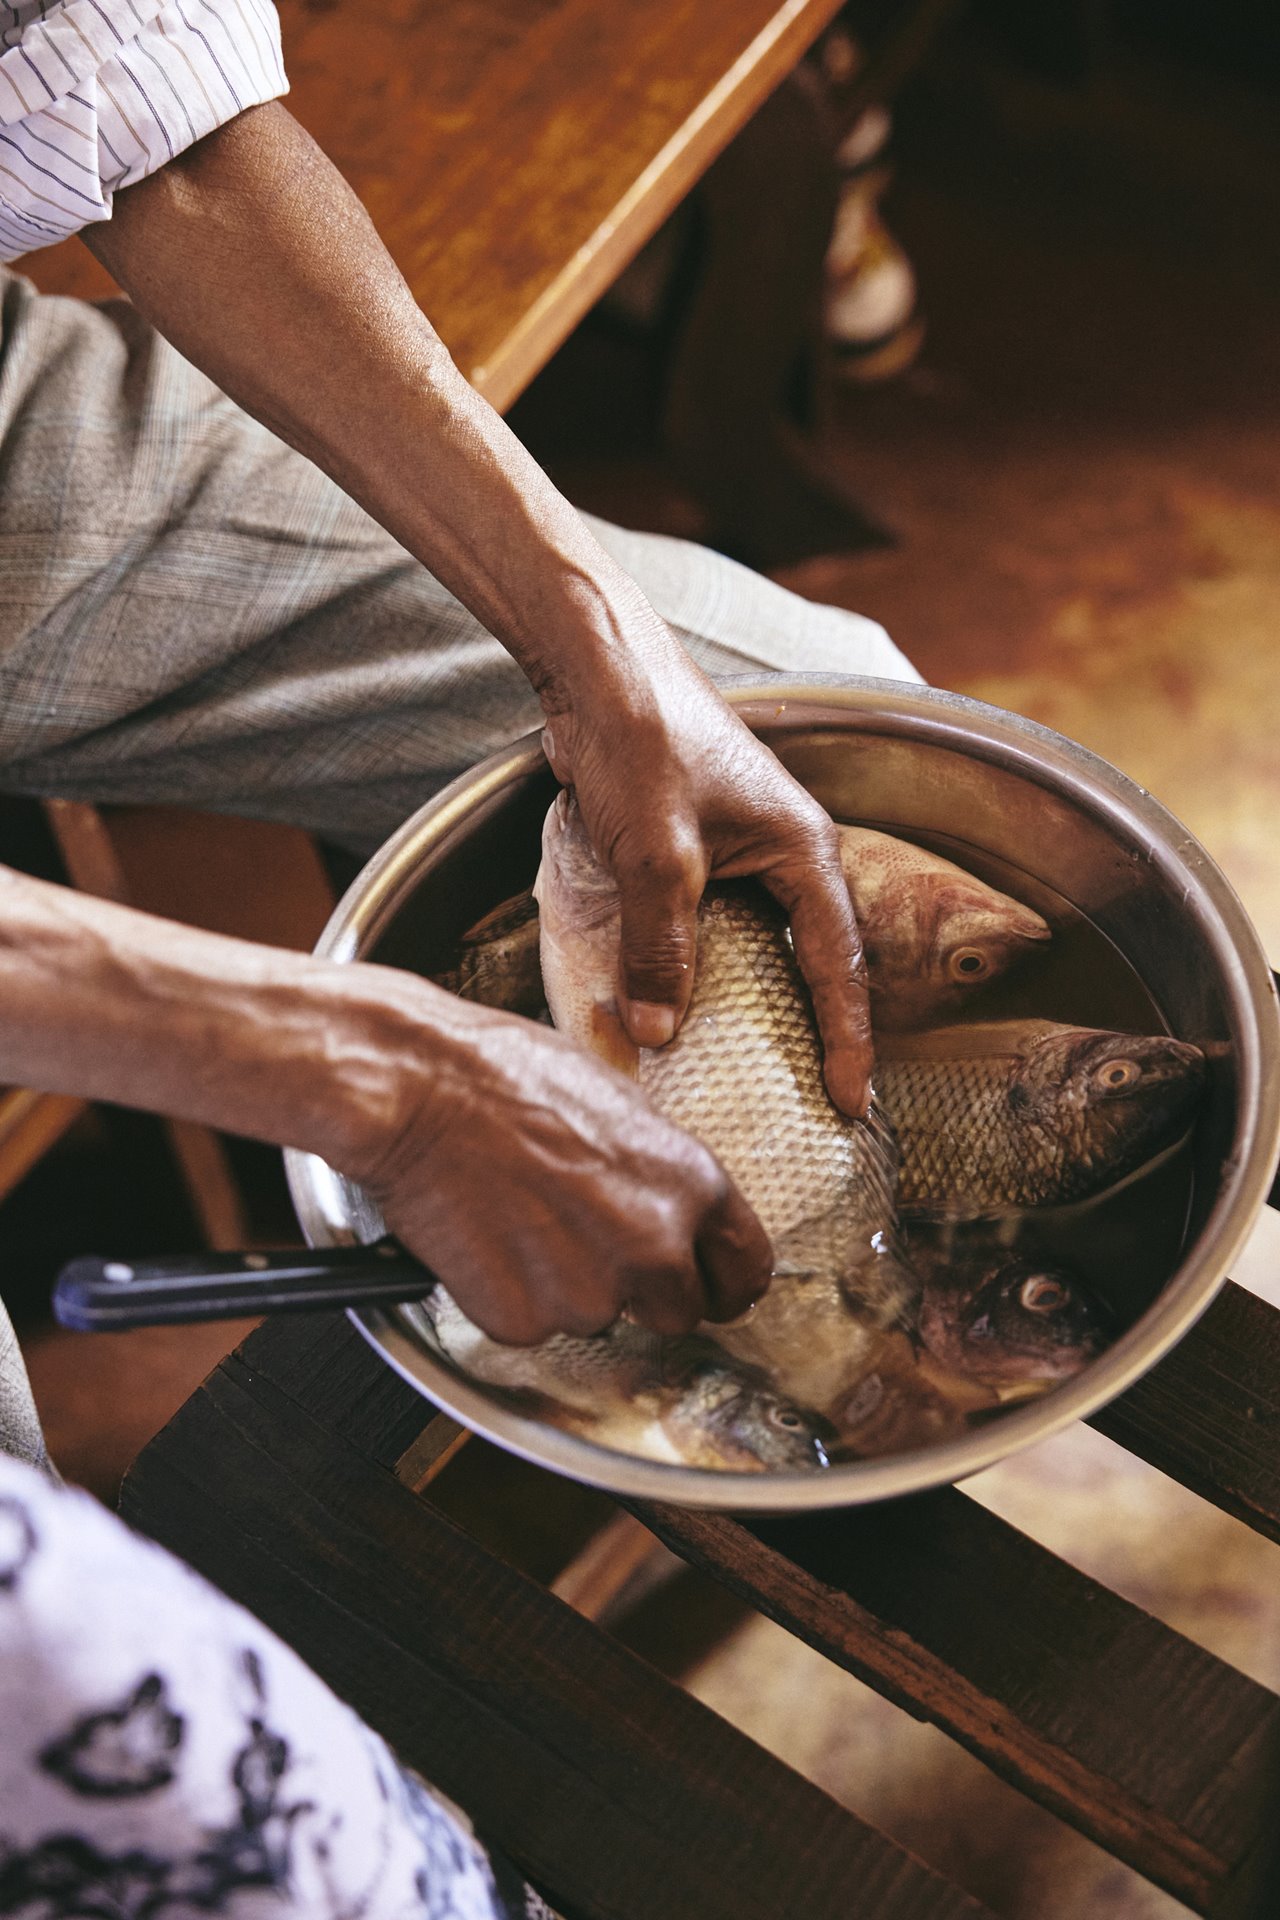 Dada Paul cleans fish for the family meal after attending church on Sunday, in Antananarivo, Madagascar. He has always loved this task, though these days sometimes puts the fish aside afterwards and forgets he has already cleaned it.